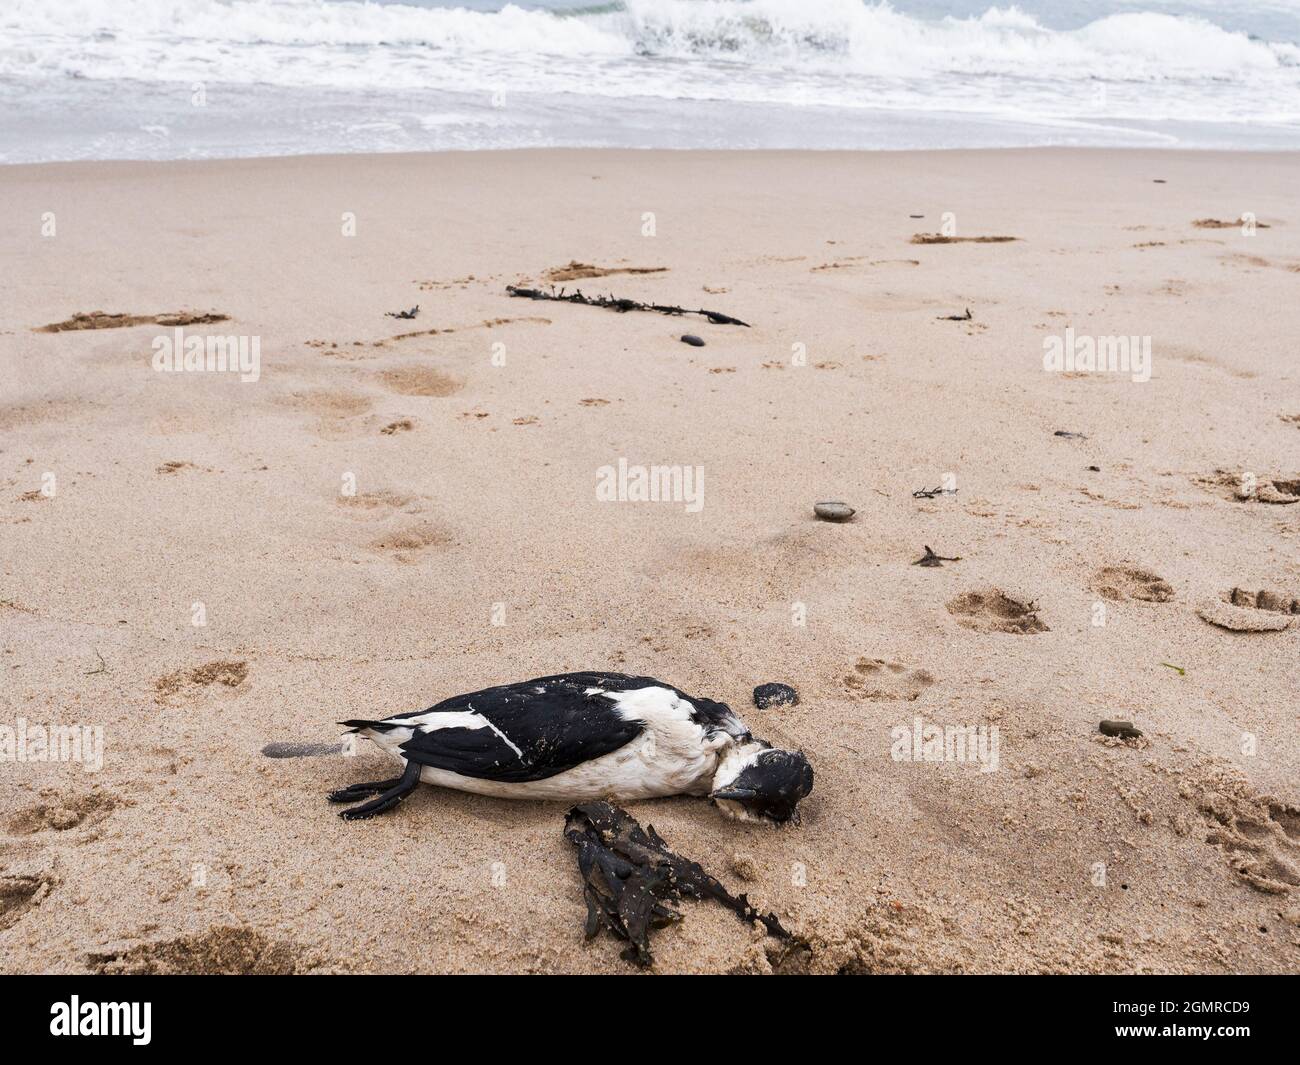 Cambois, Northumberland, 18th September 2021, unusual amount of seabird deaths in razorbiil and guillemot populations along the coast. Gaul NE News/ Alamy News Stock Photo